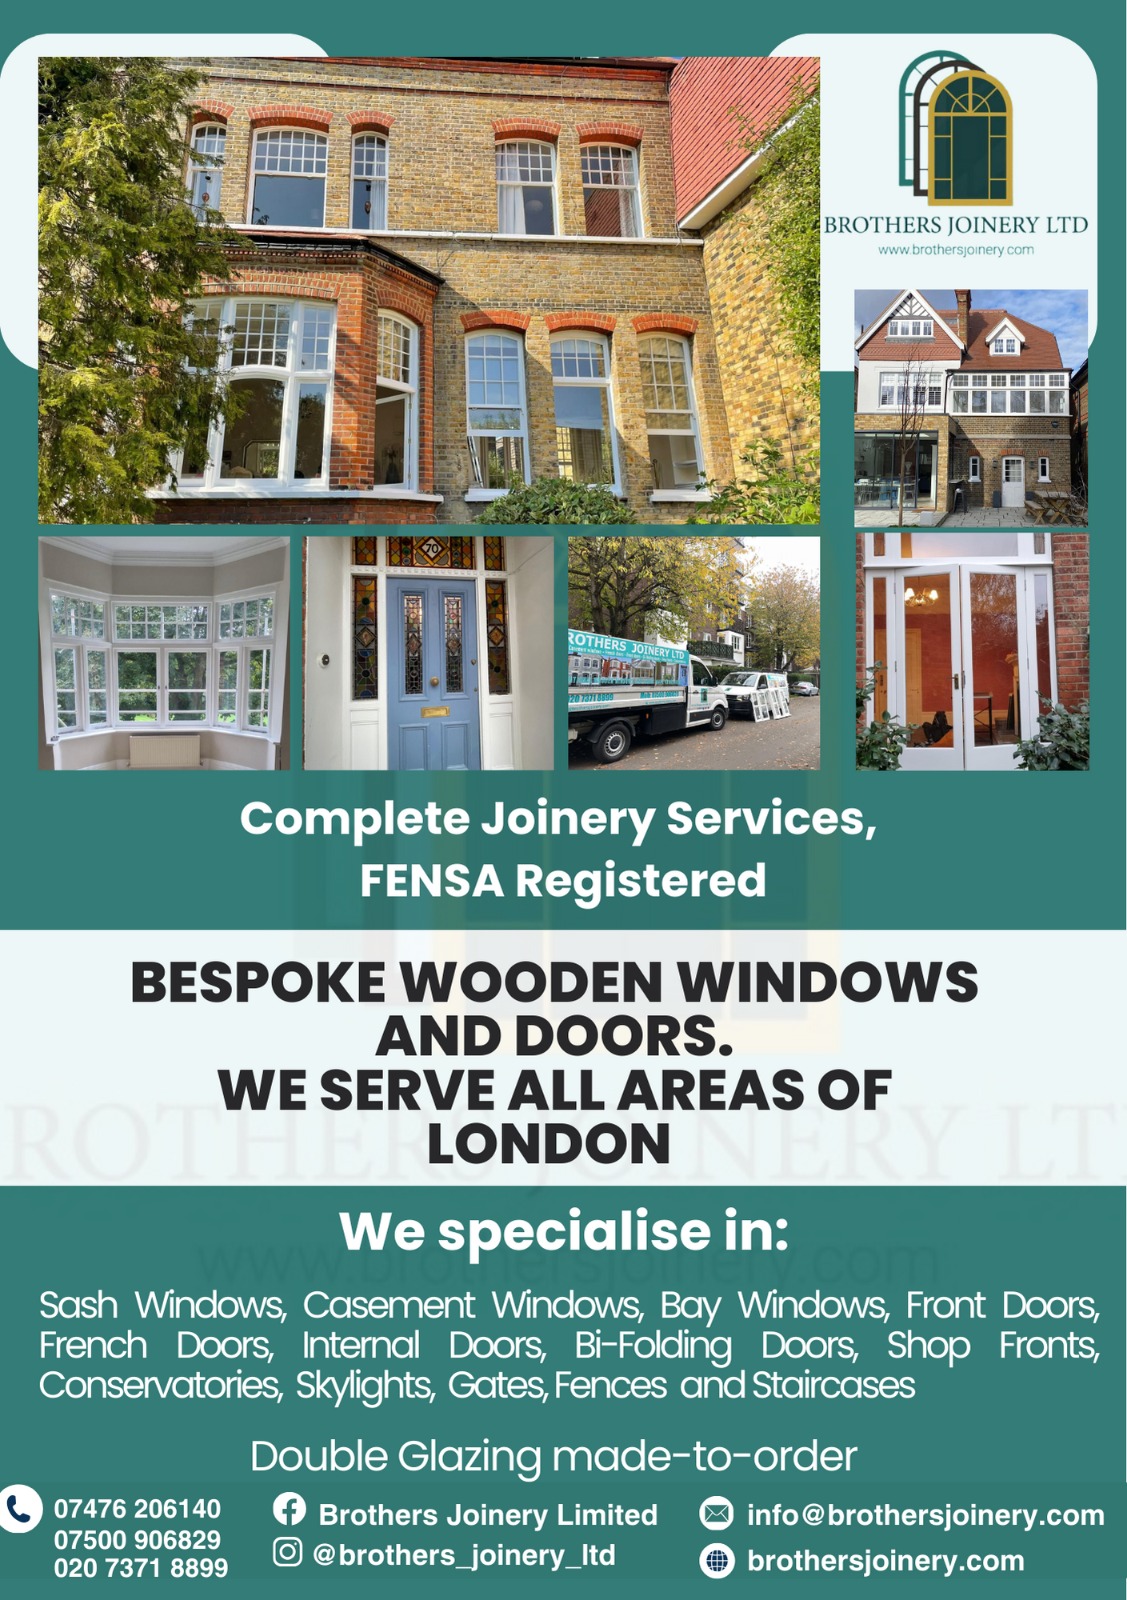 Brothers Joinery – Bespoke Wooden Windows And Doors